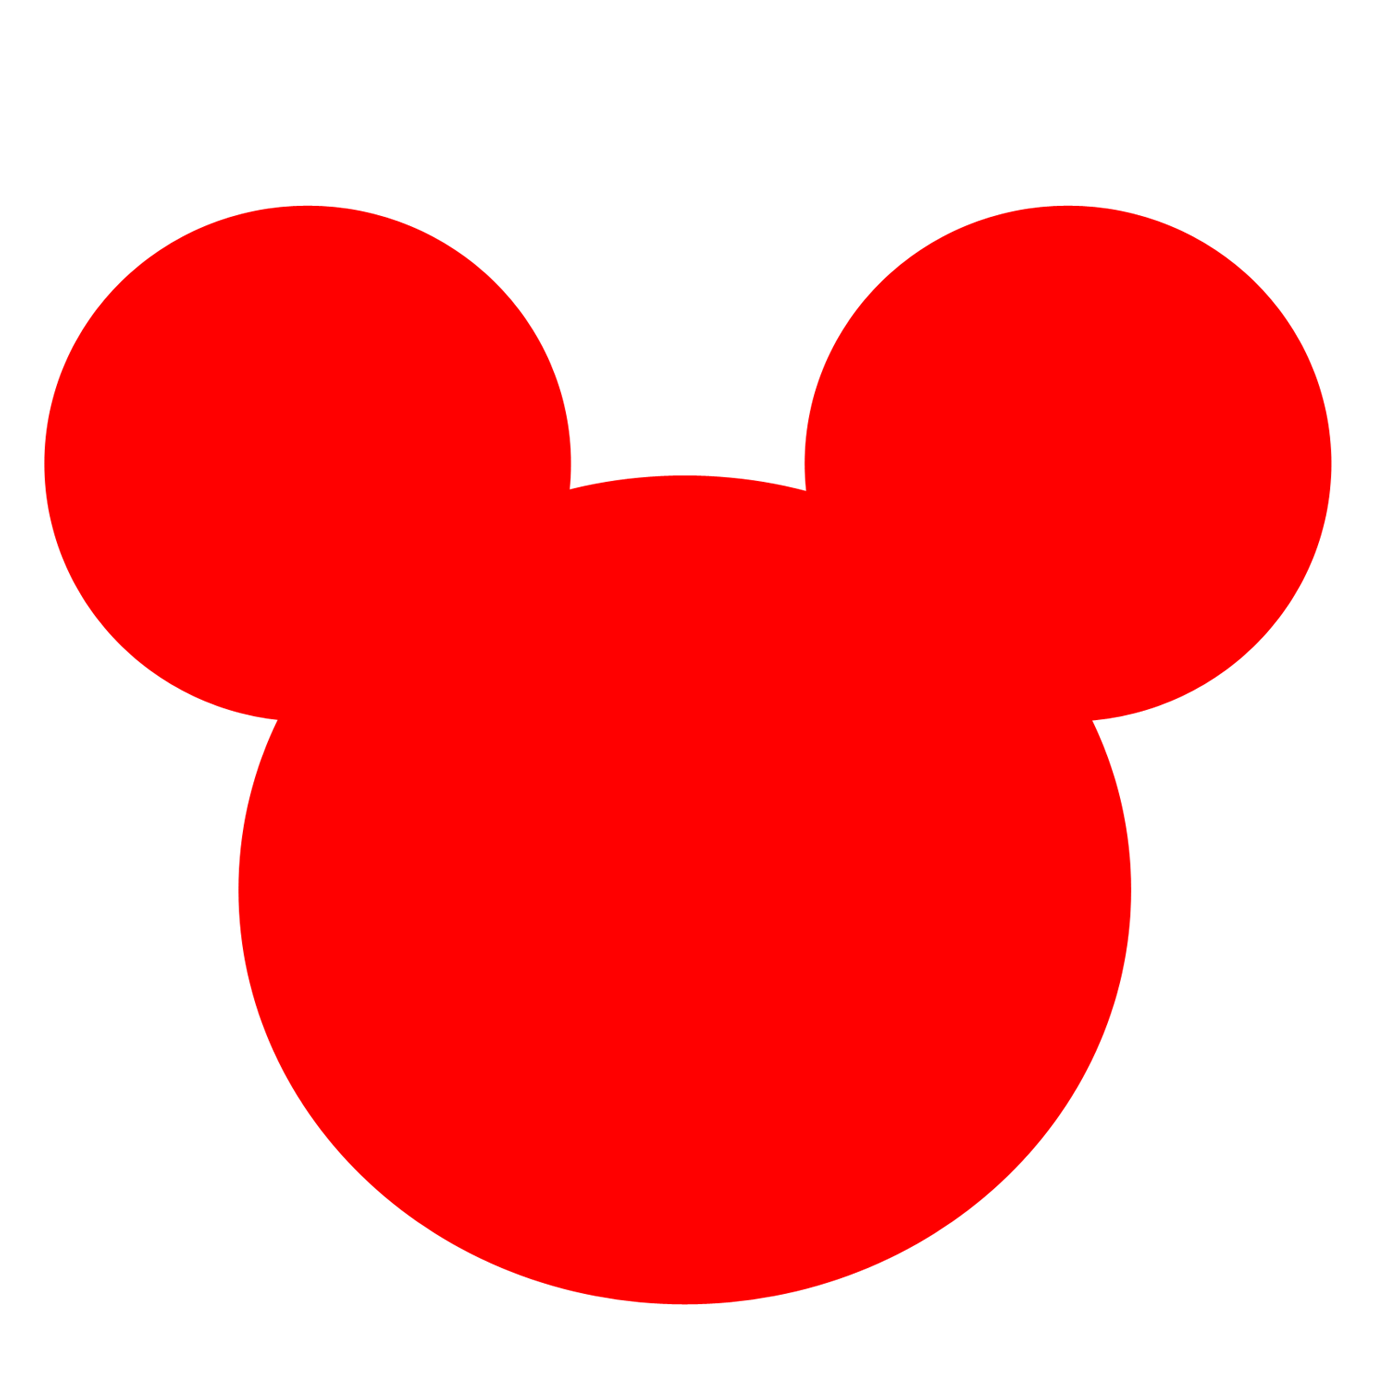 mickey face silhouette